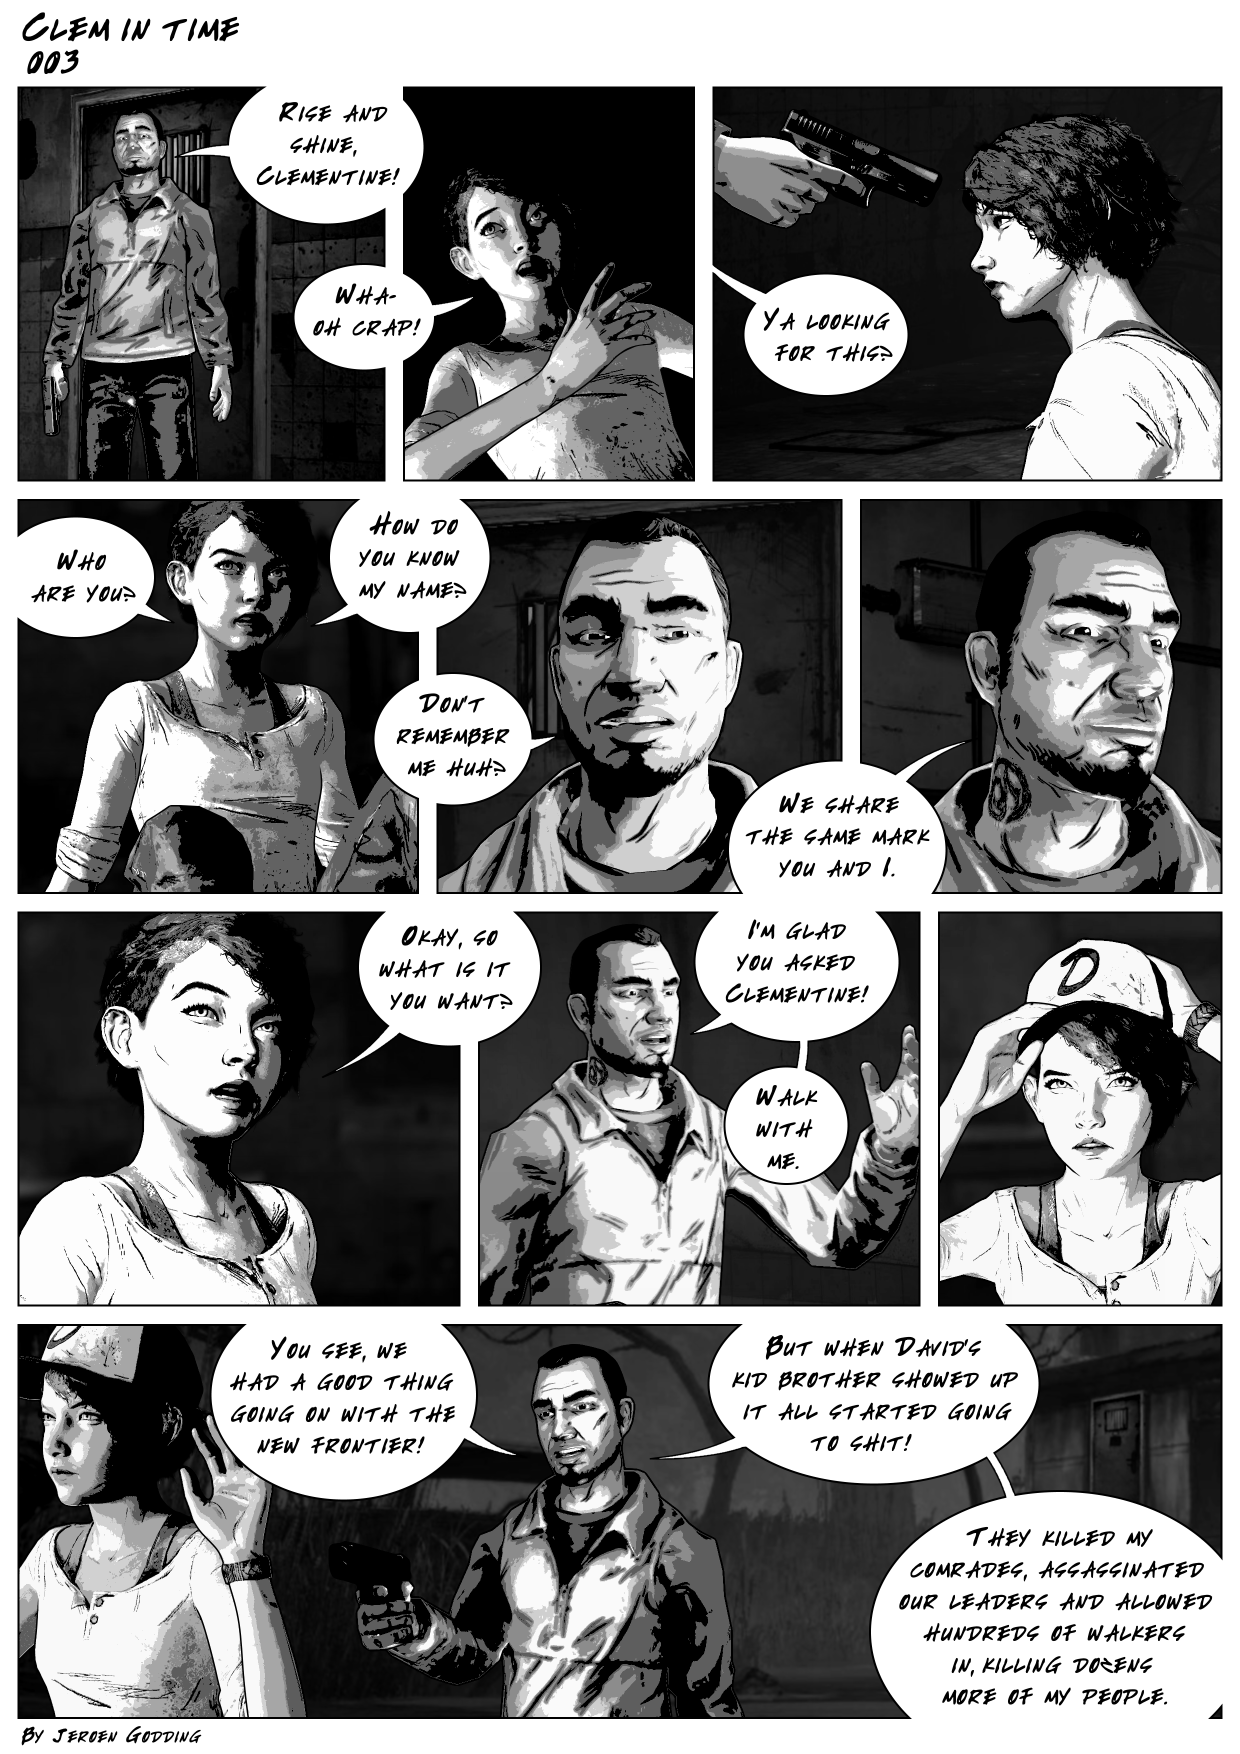 Walking Fan Art Of The Dead New And Improved Page 124 — Telltale Community